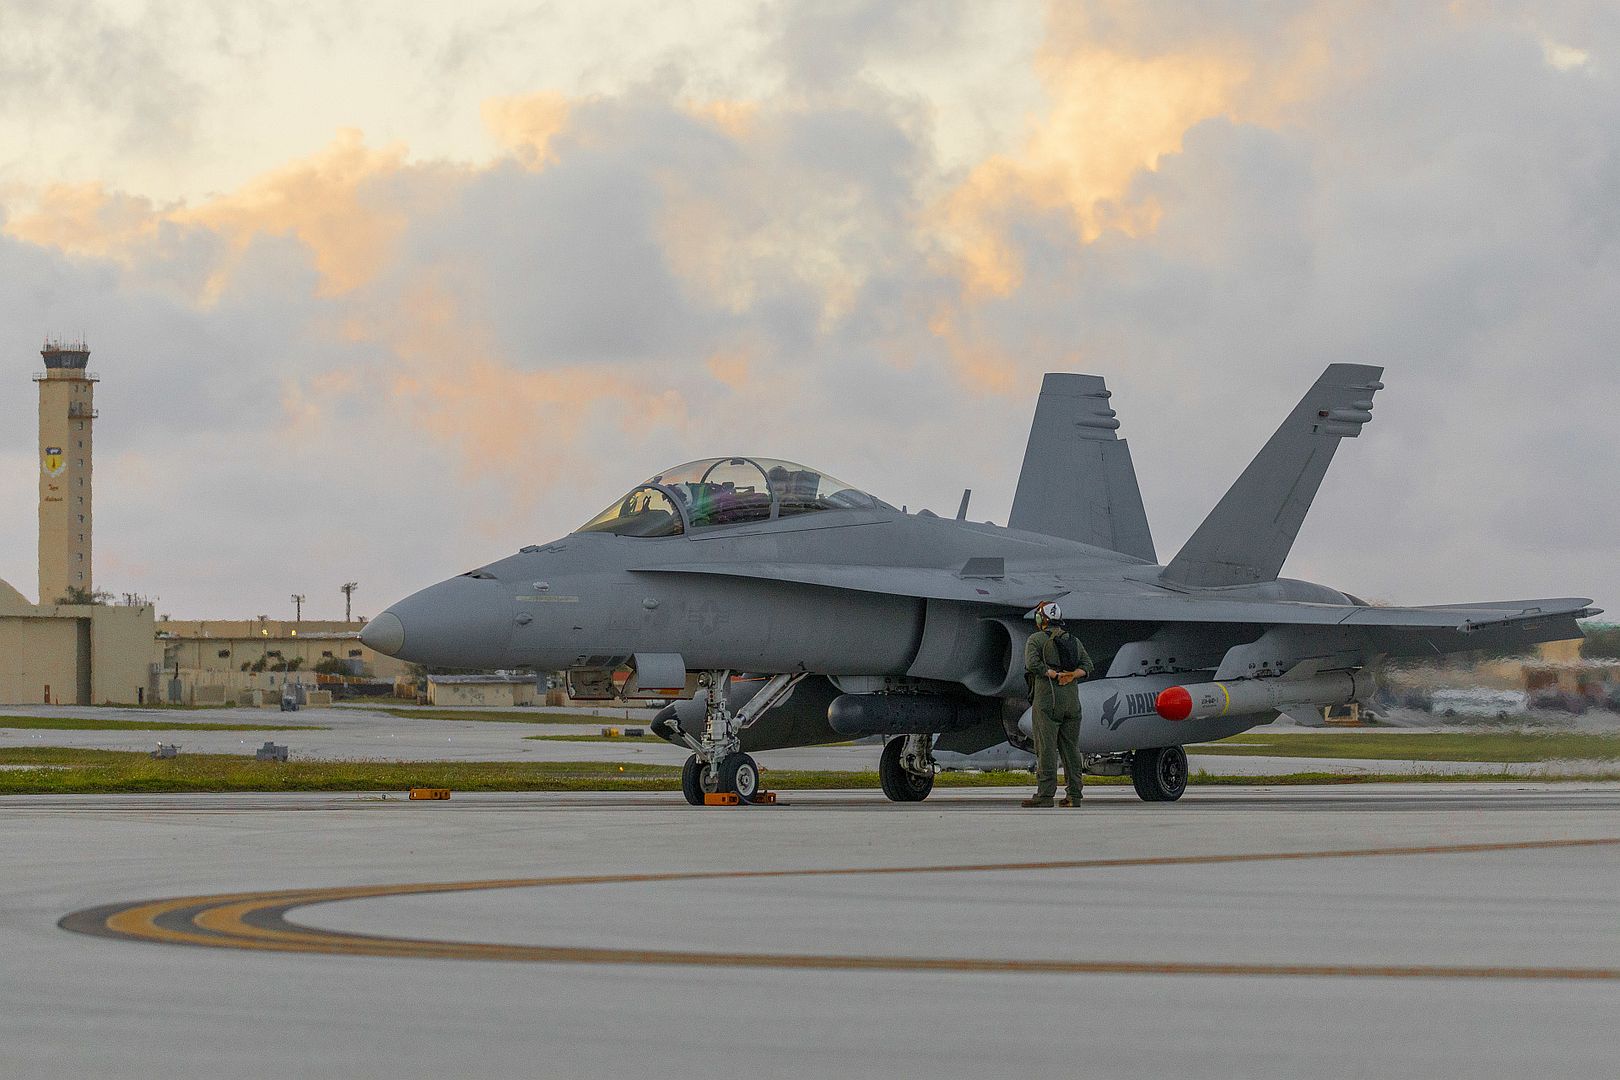 18D Hornet Aircraft With Marine All Weather Fighter Attack Squadron 533 Prepares To Take Off From Andersen Air Force Base Guam June 14 2022